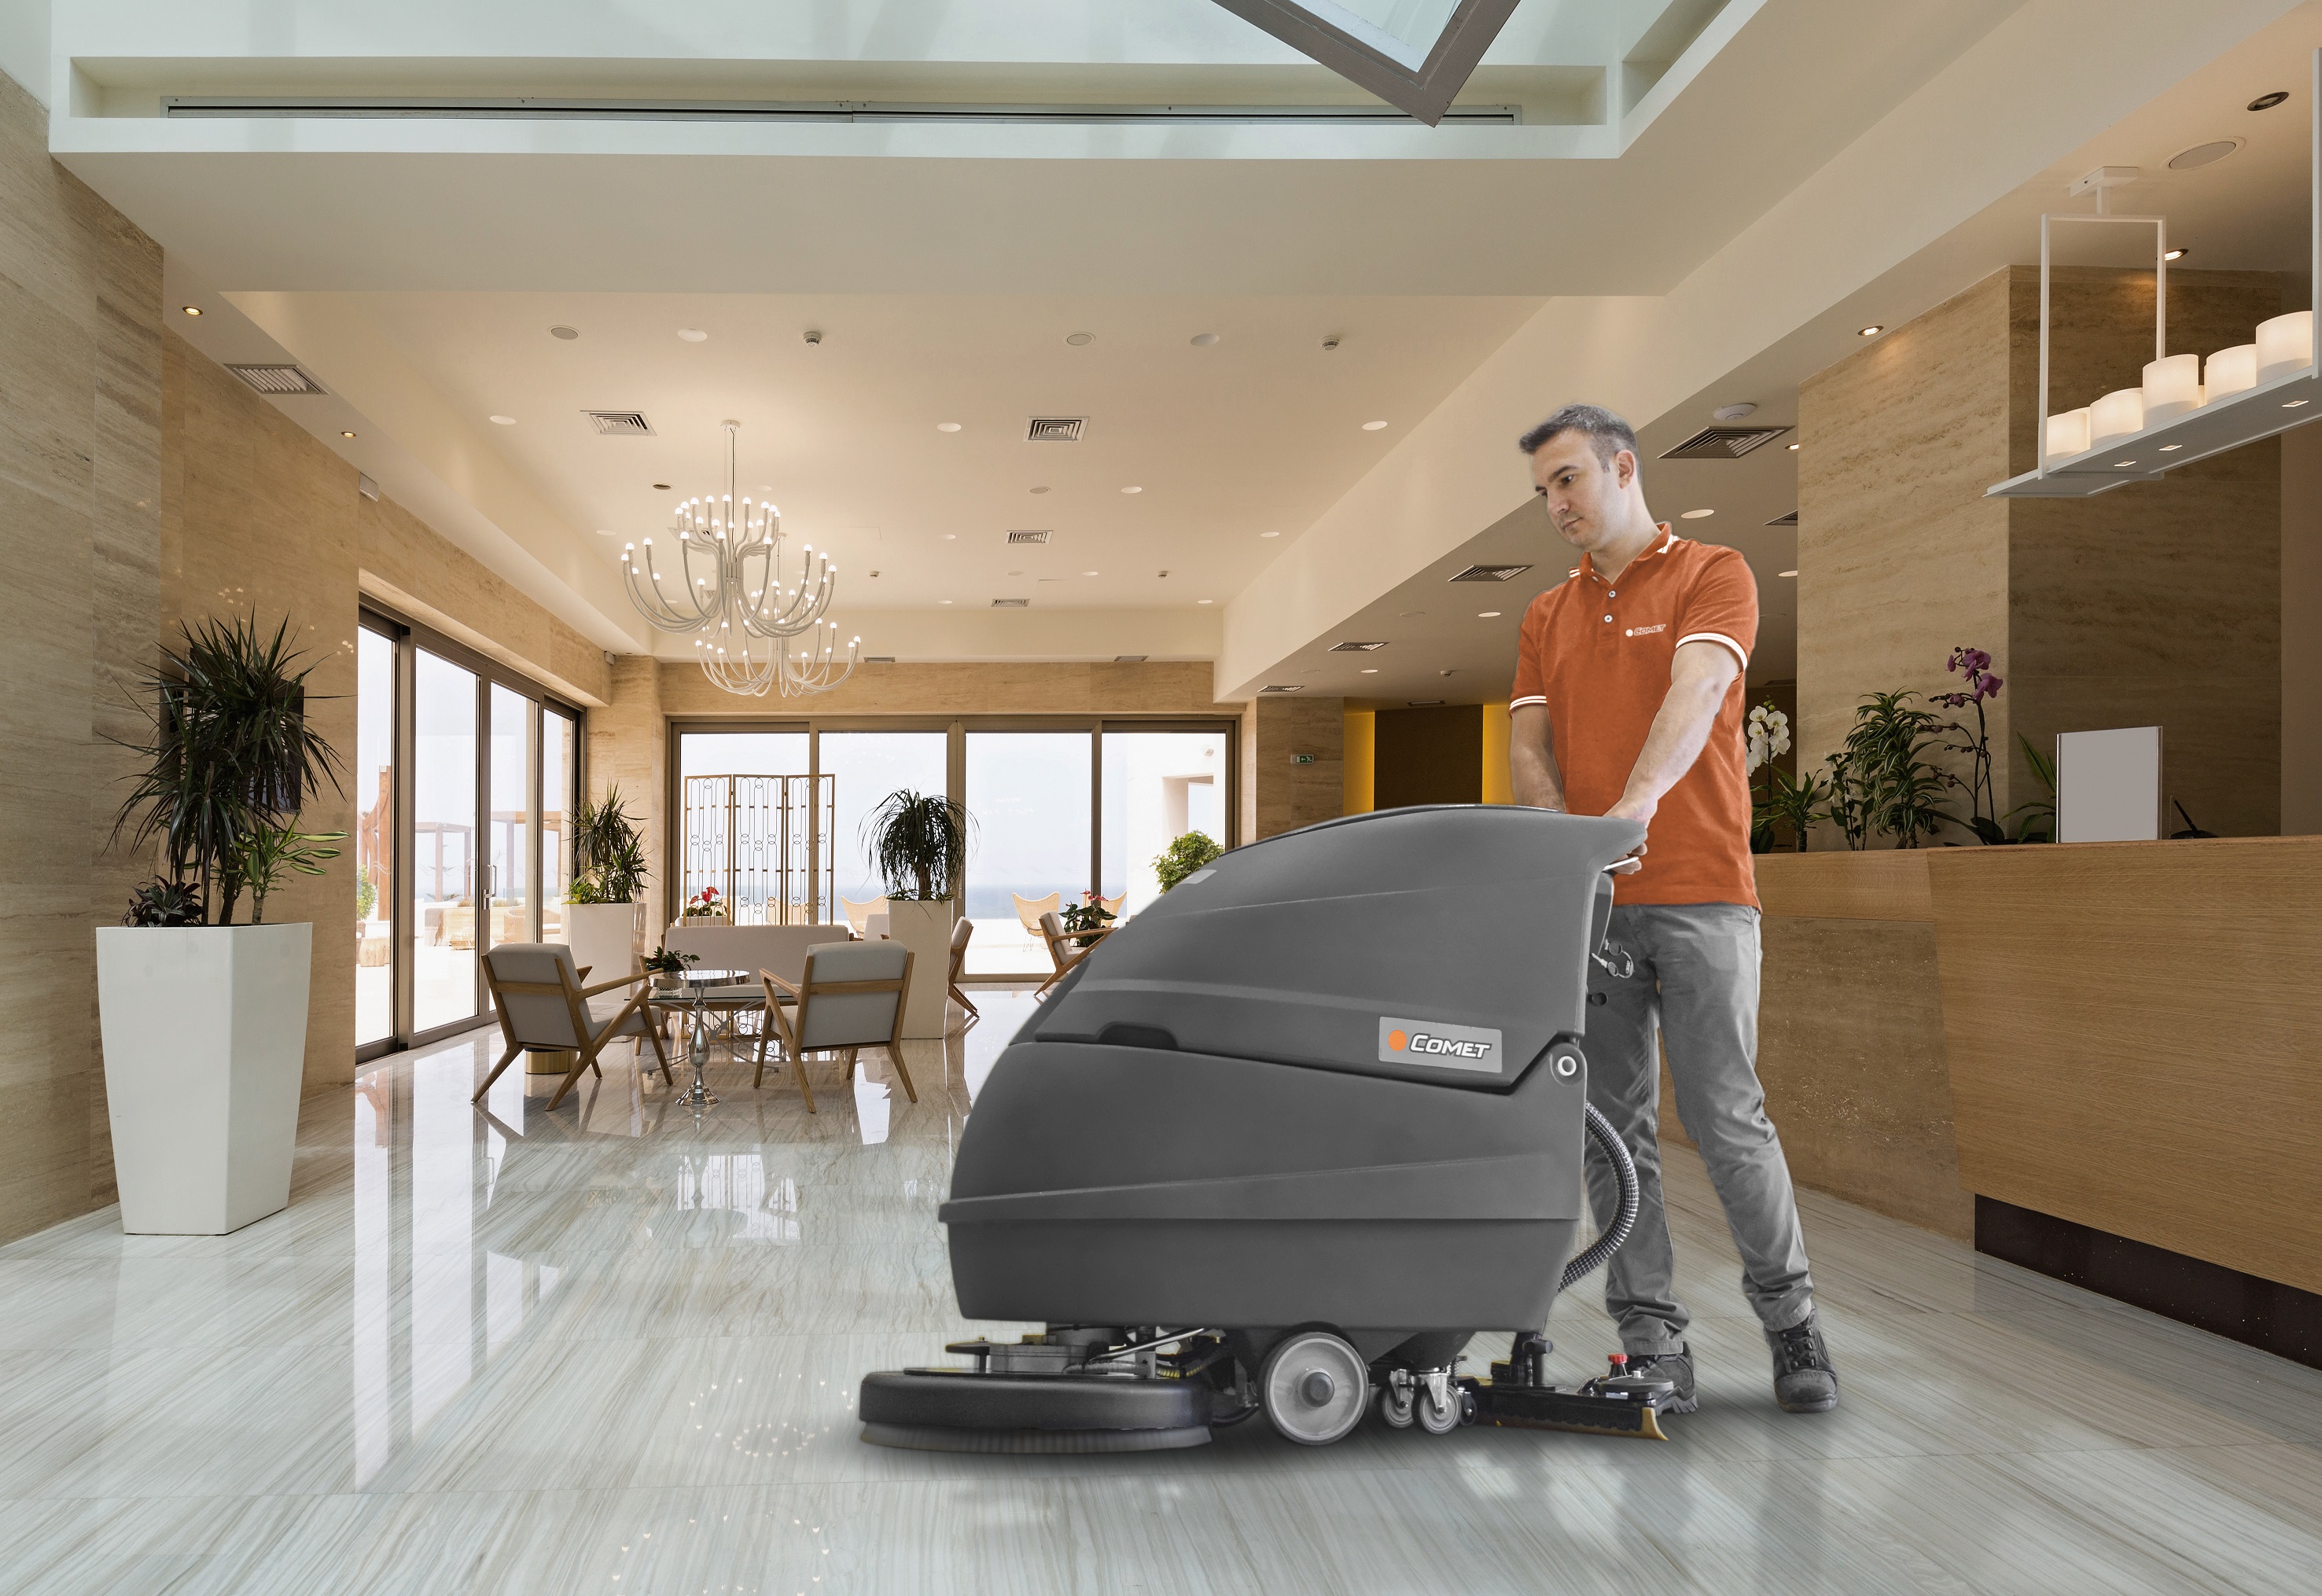 CLEANING AND MOPPING HOTEL AND RESTAURANT FLOORS: FLOOR SCRUBBER DRYERS AND SWEEPERS ARE TRUE MUST-HAVES